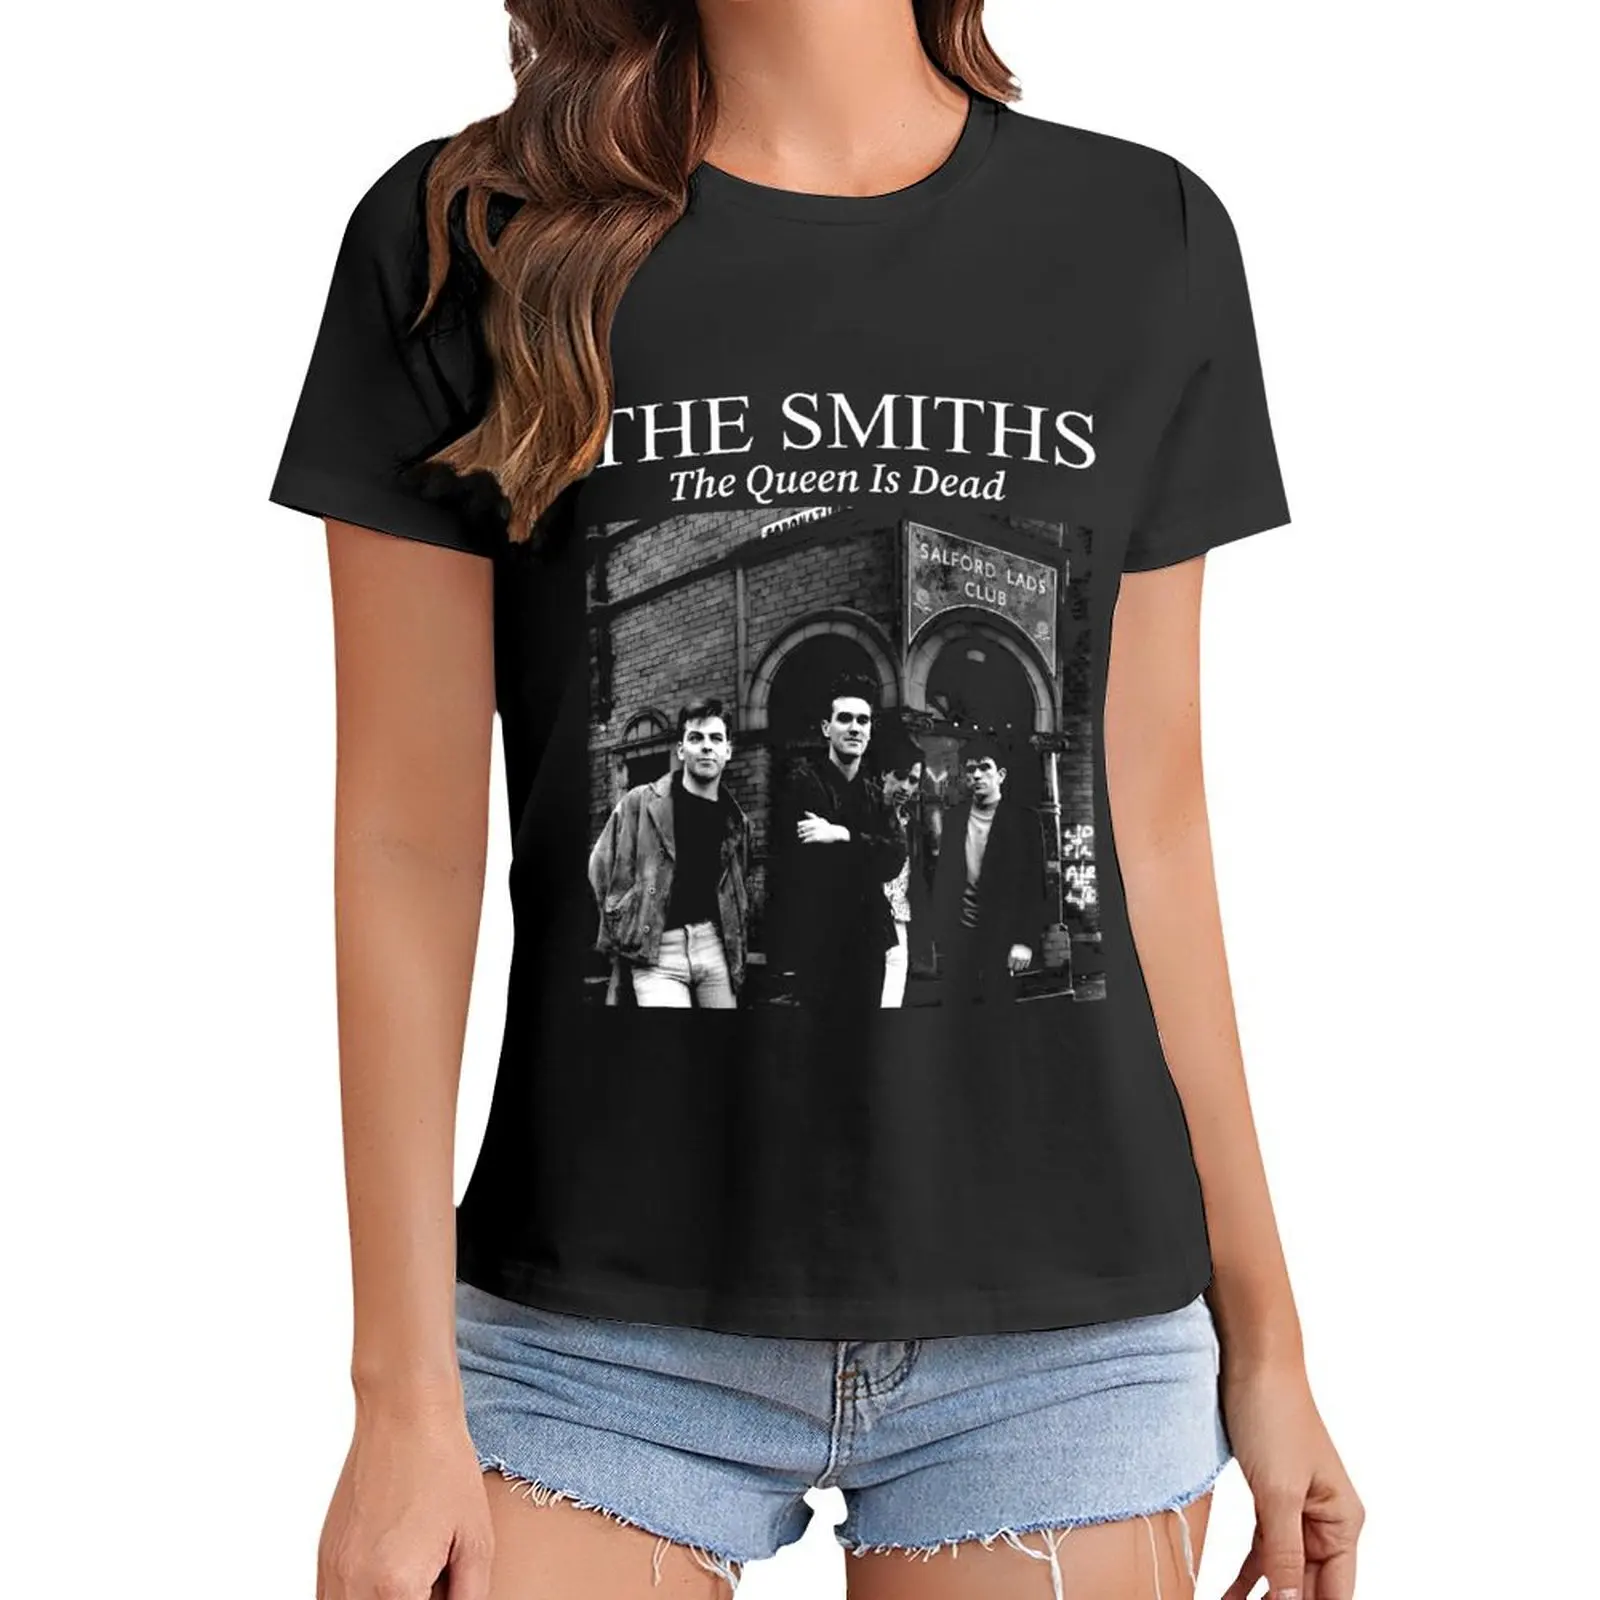 

Music Band The Smiths The Queen is Dead Retro Vintage Album T-Shirt Blouse blacks tops womans clothing